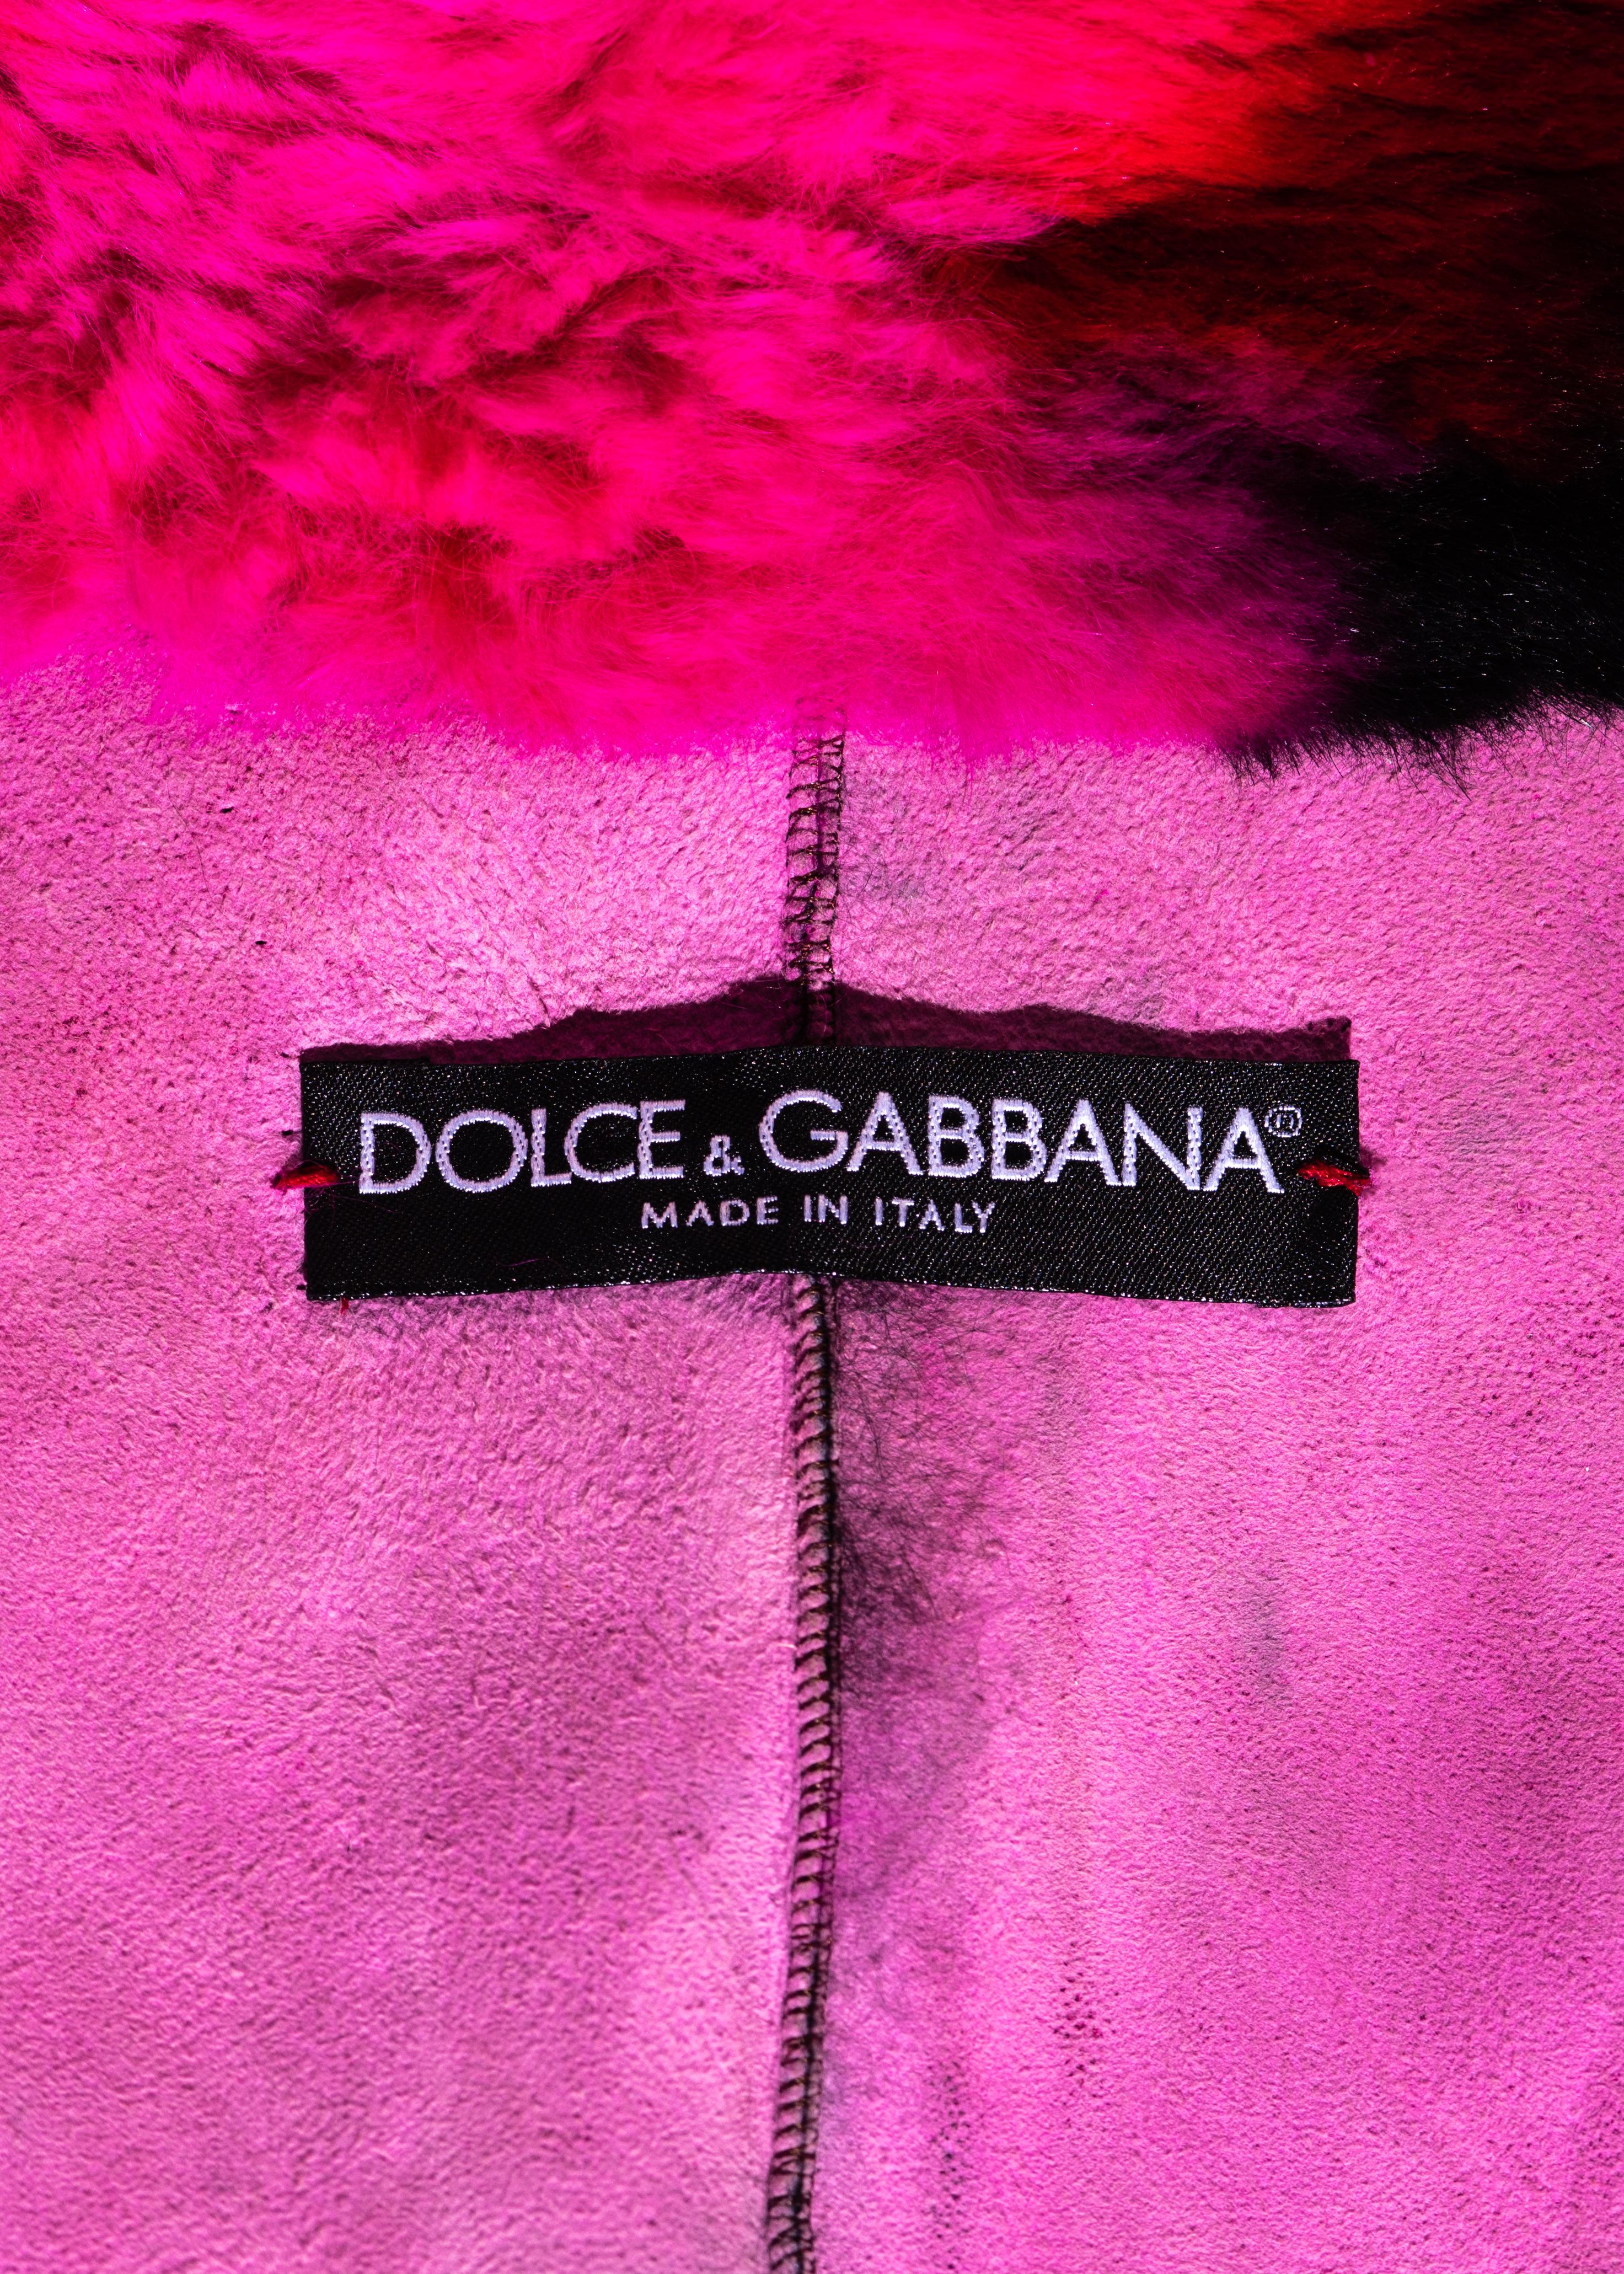 Dolce & Gabbana pink and black tie-dyed fur maxi coat, fw 1999 For Sale 3